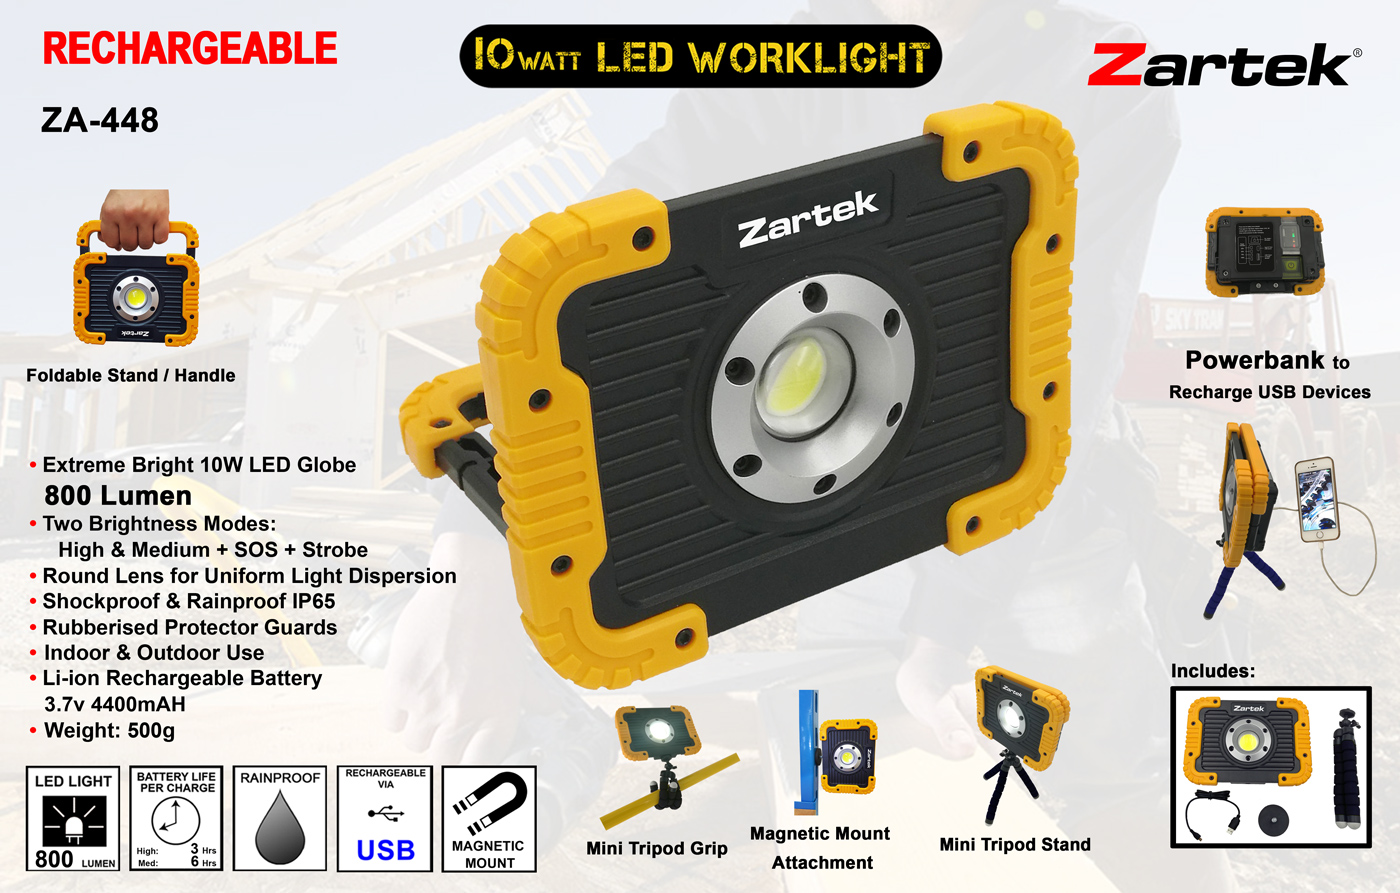 USB Rechargeable LED Worklight 10 Watt with Powerb